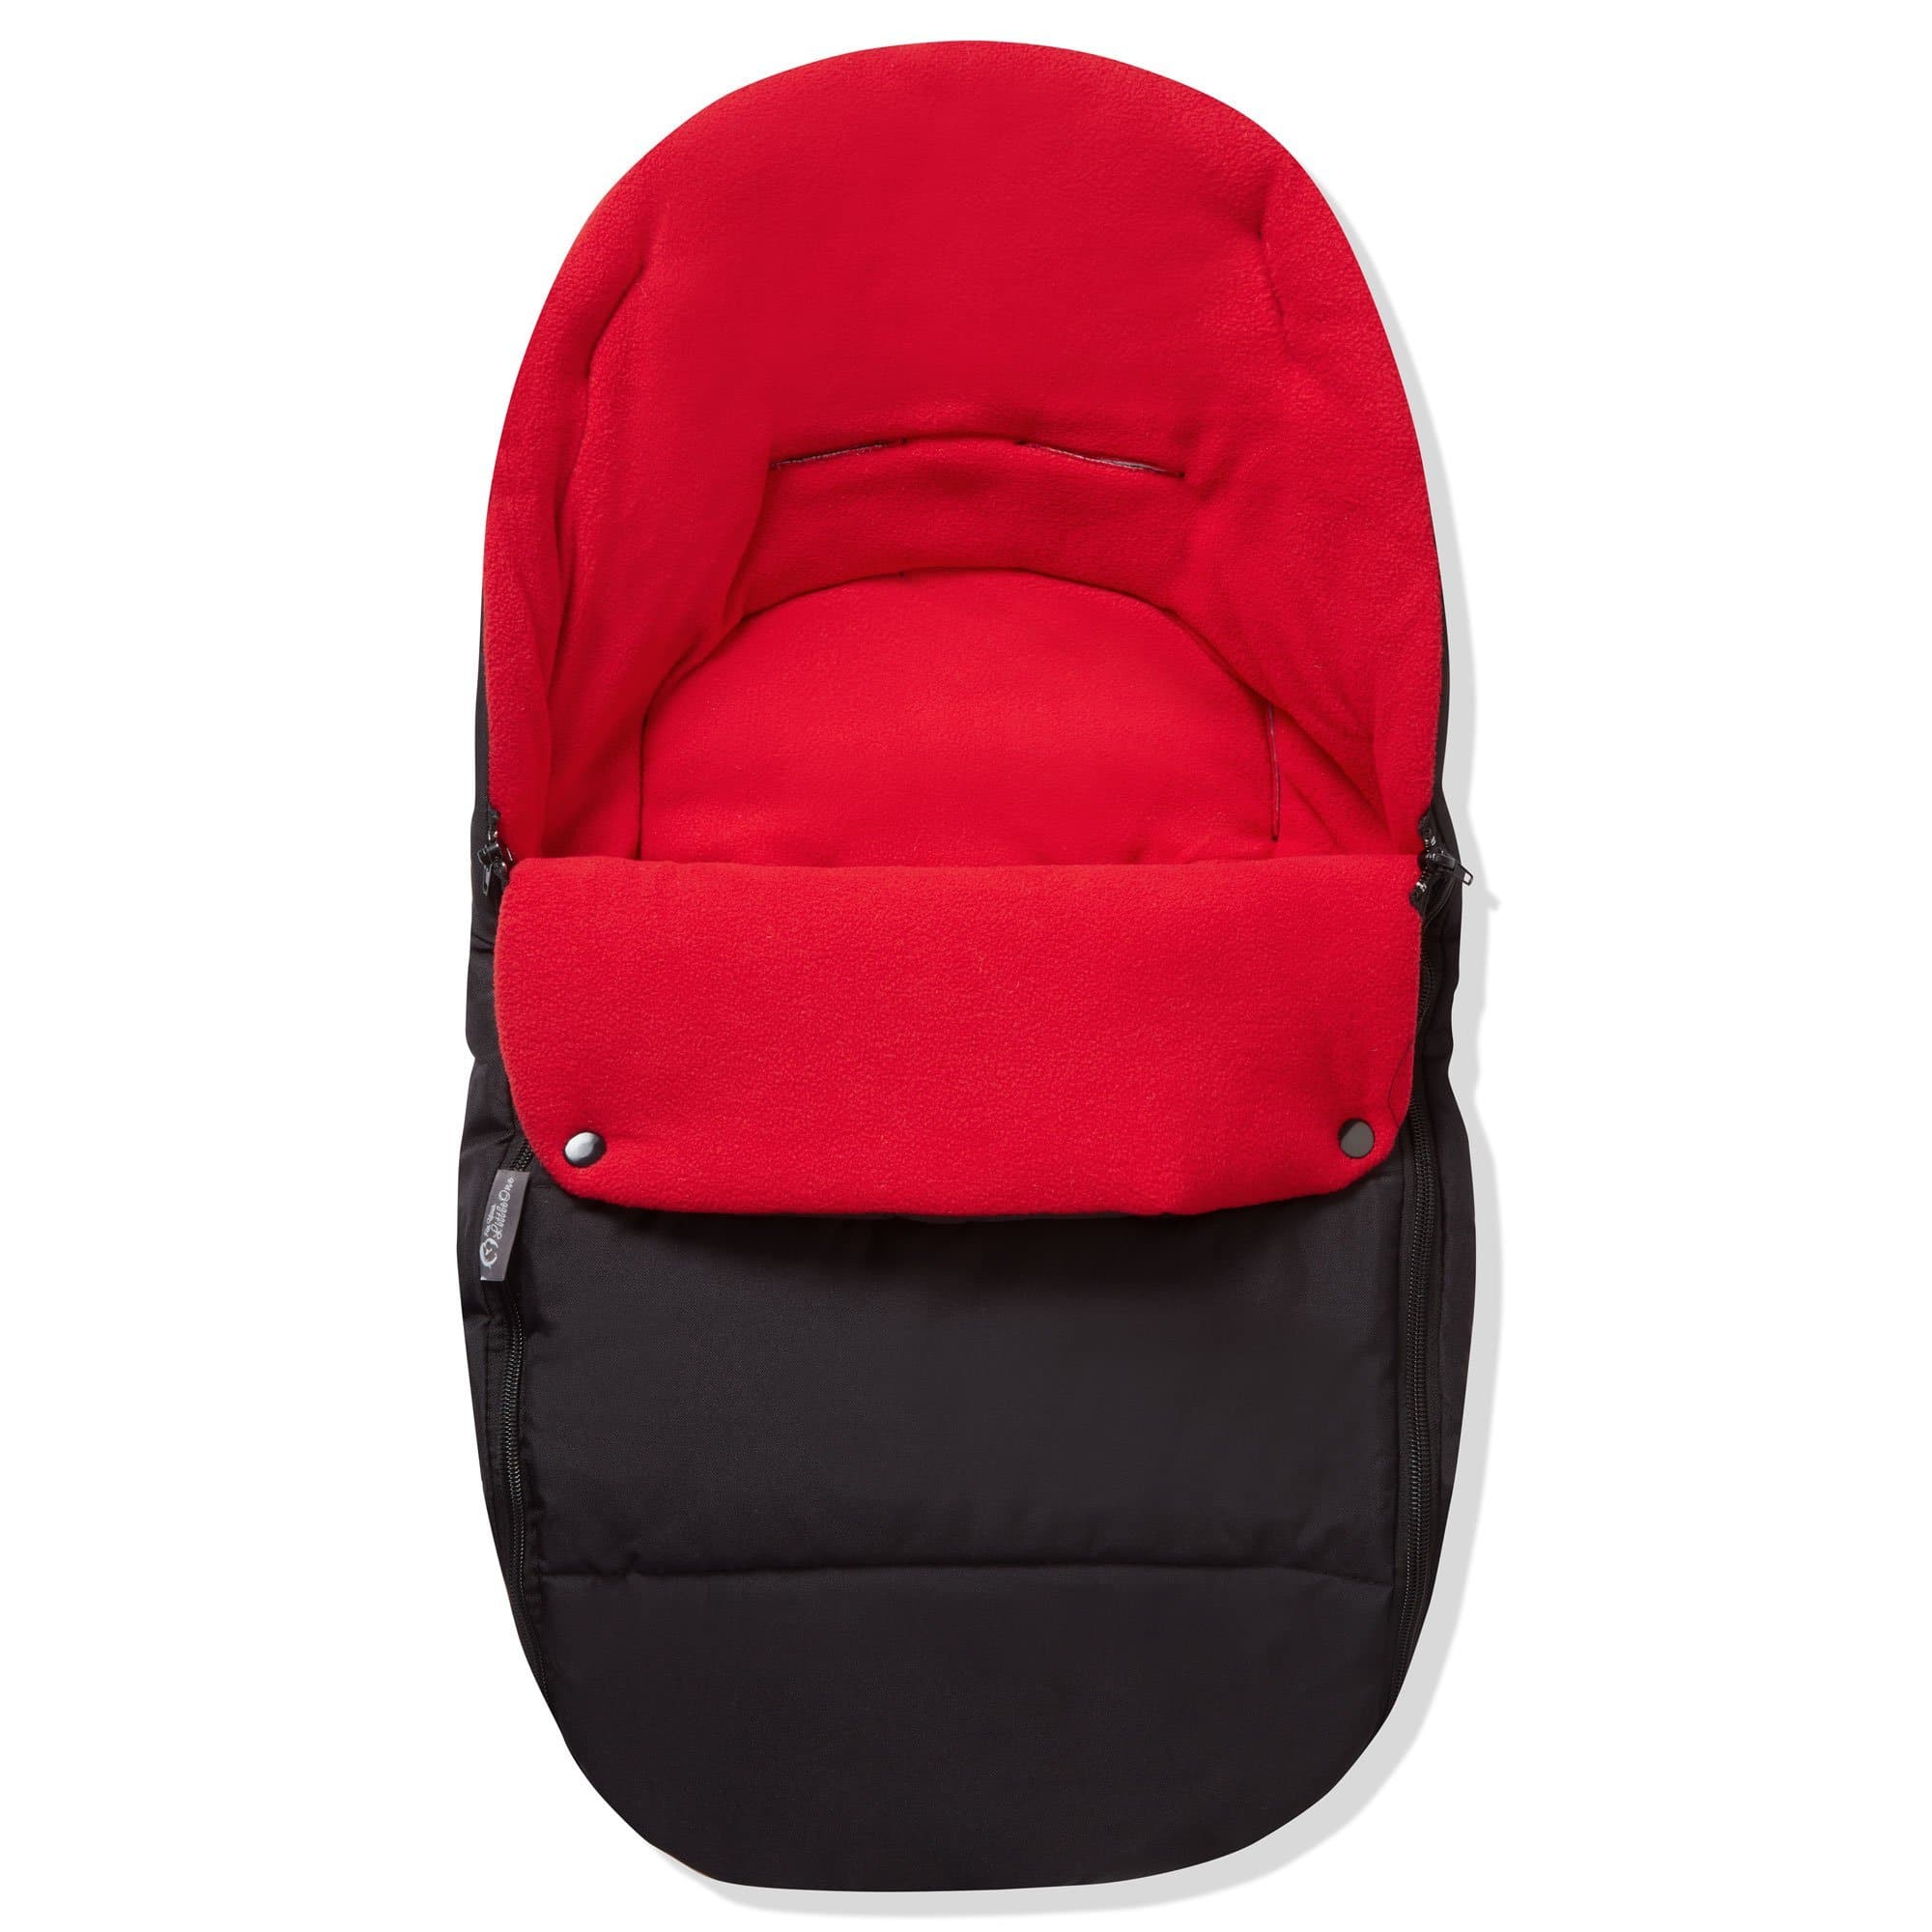 Premium Car Seat Footmuff / Cosy Toes Compatible with Babylo - Fire Red / Fits All Models | For Your Little One